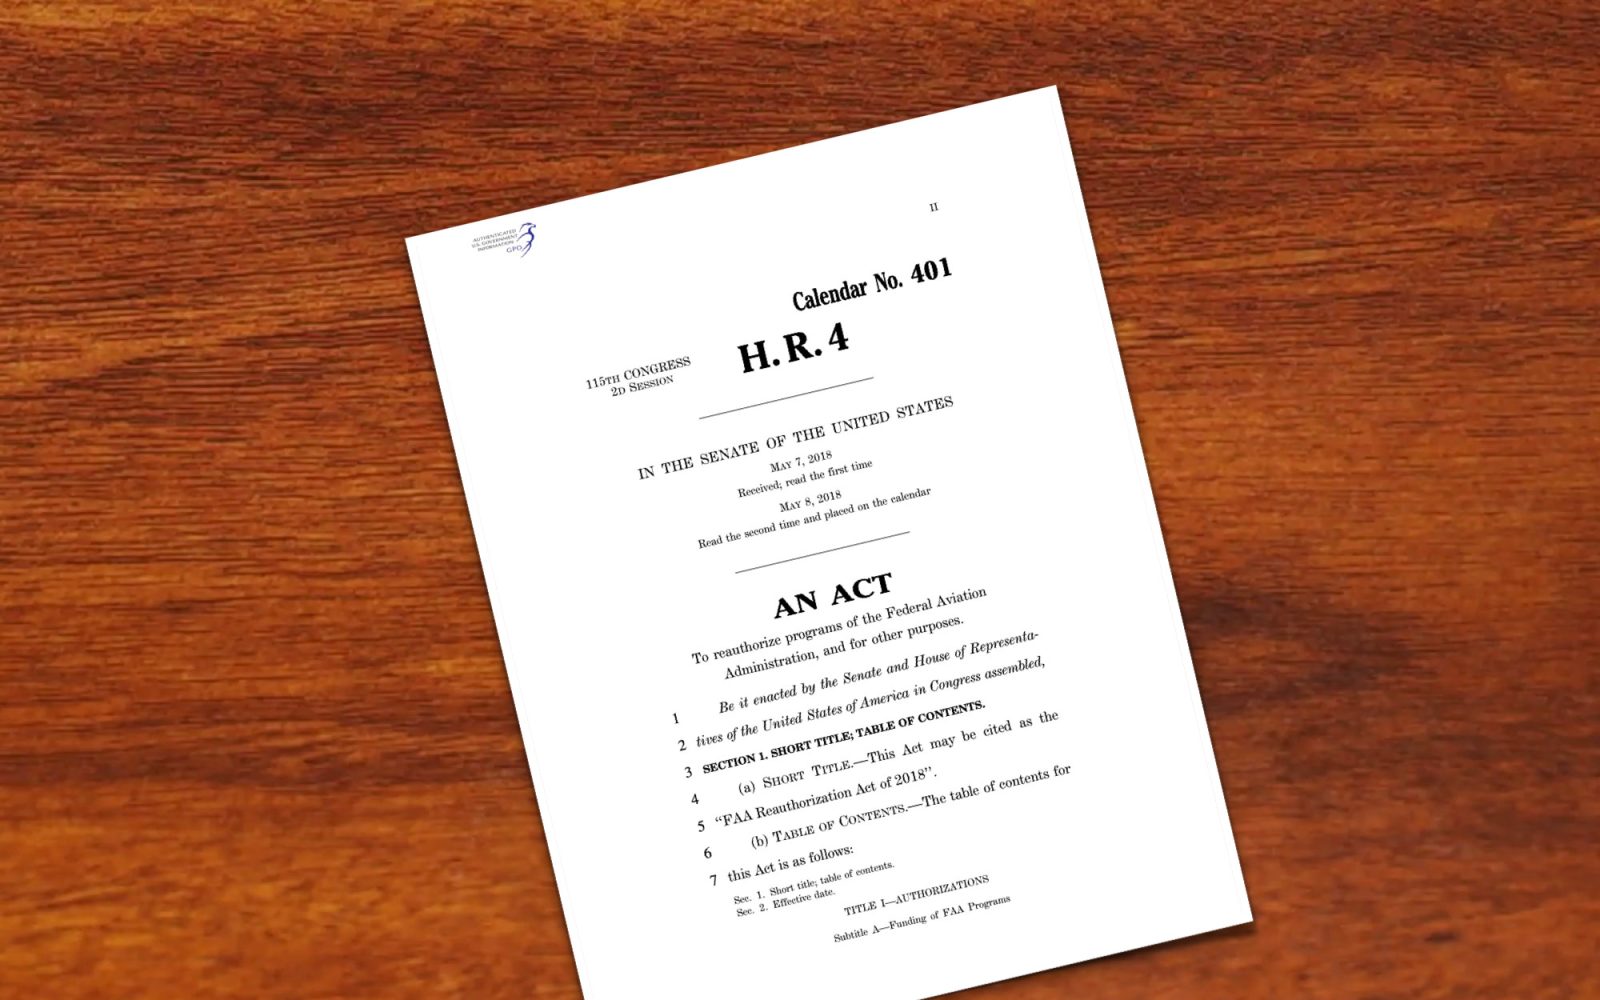 H.R. 302, the FAA Reauthorization Act of 2018 passed by Senate today